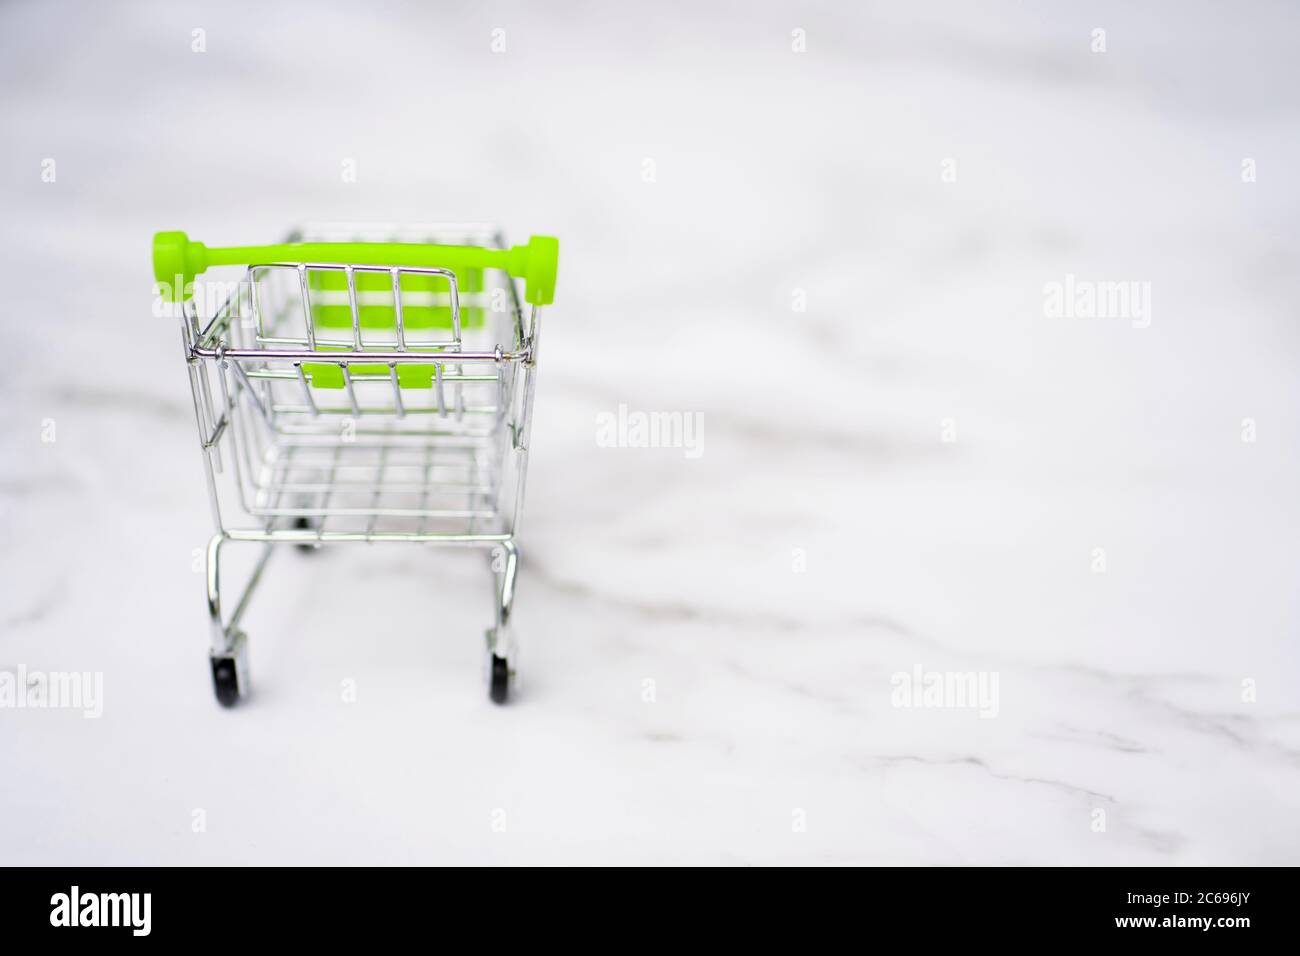 shopping cart. Copy space for text or design. Stainless steel shopping trolley upside down. Minimalist shopping concept. Stock Photo